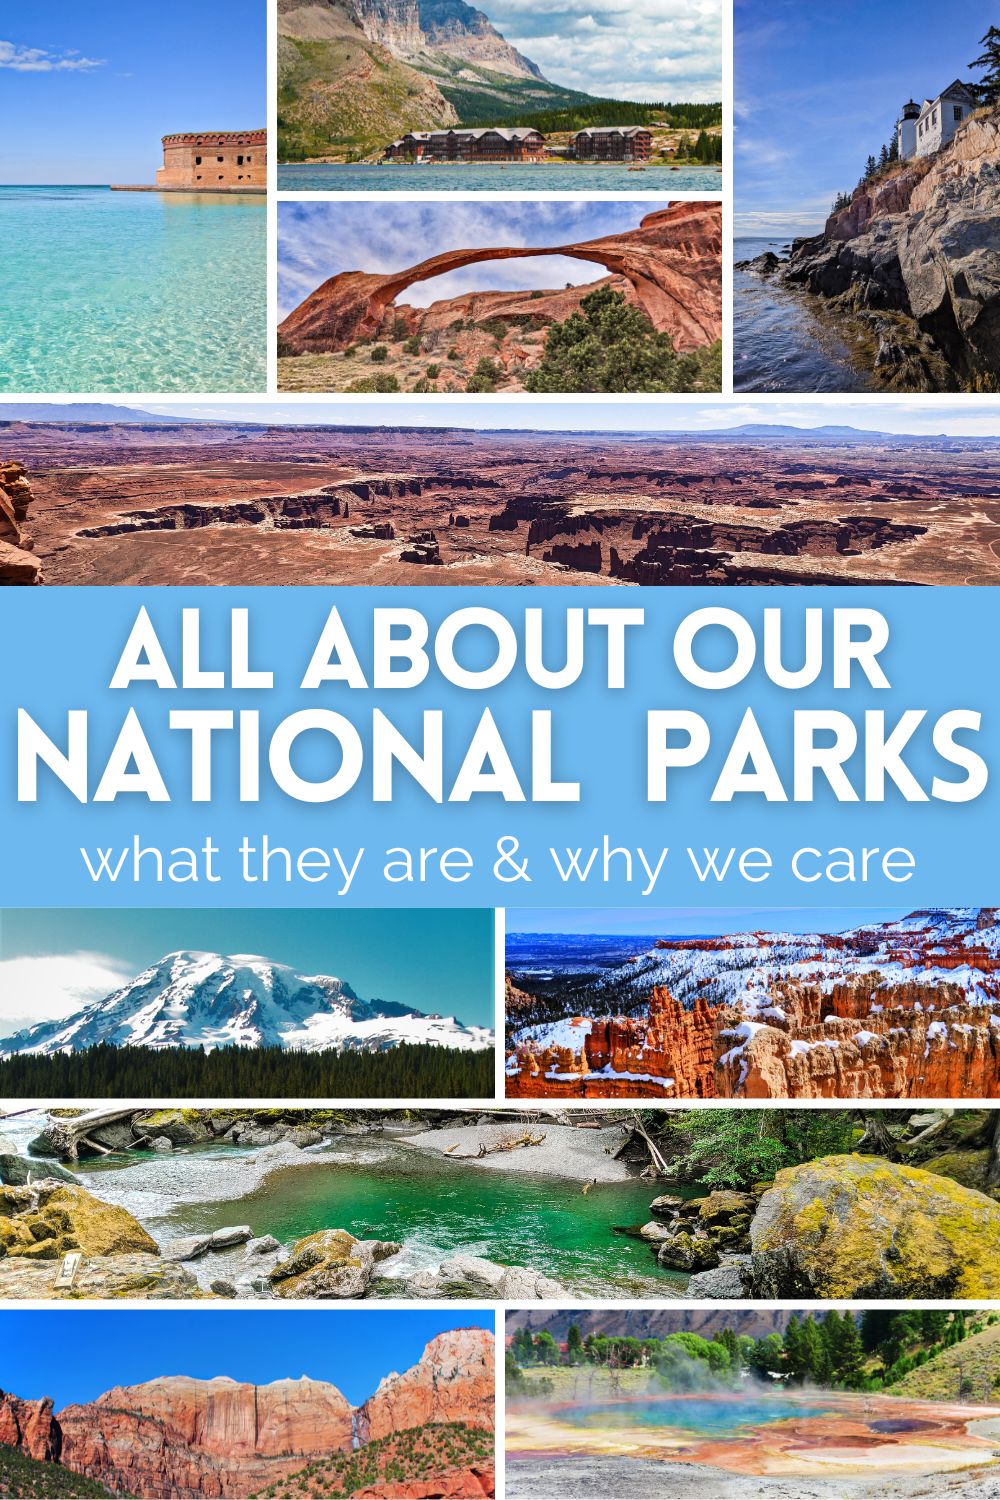 People love National Parks but what are they actually? From National Park to National Monument and everything in between, need to know tips for visiting and planning NPS trips.